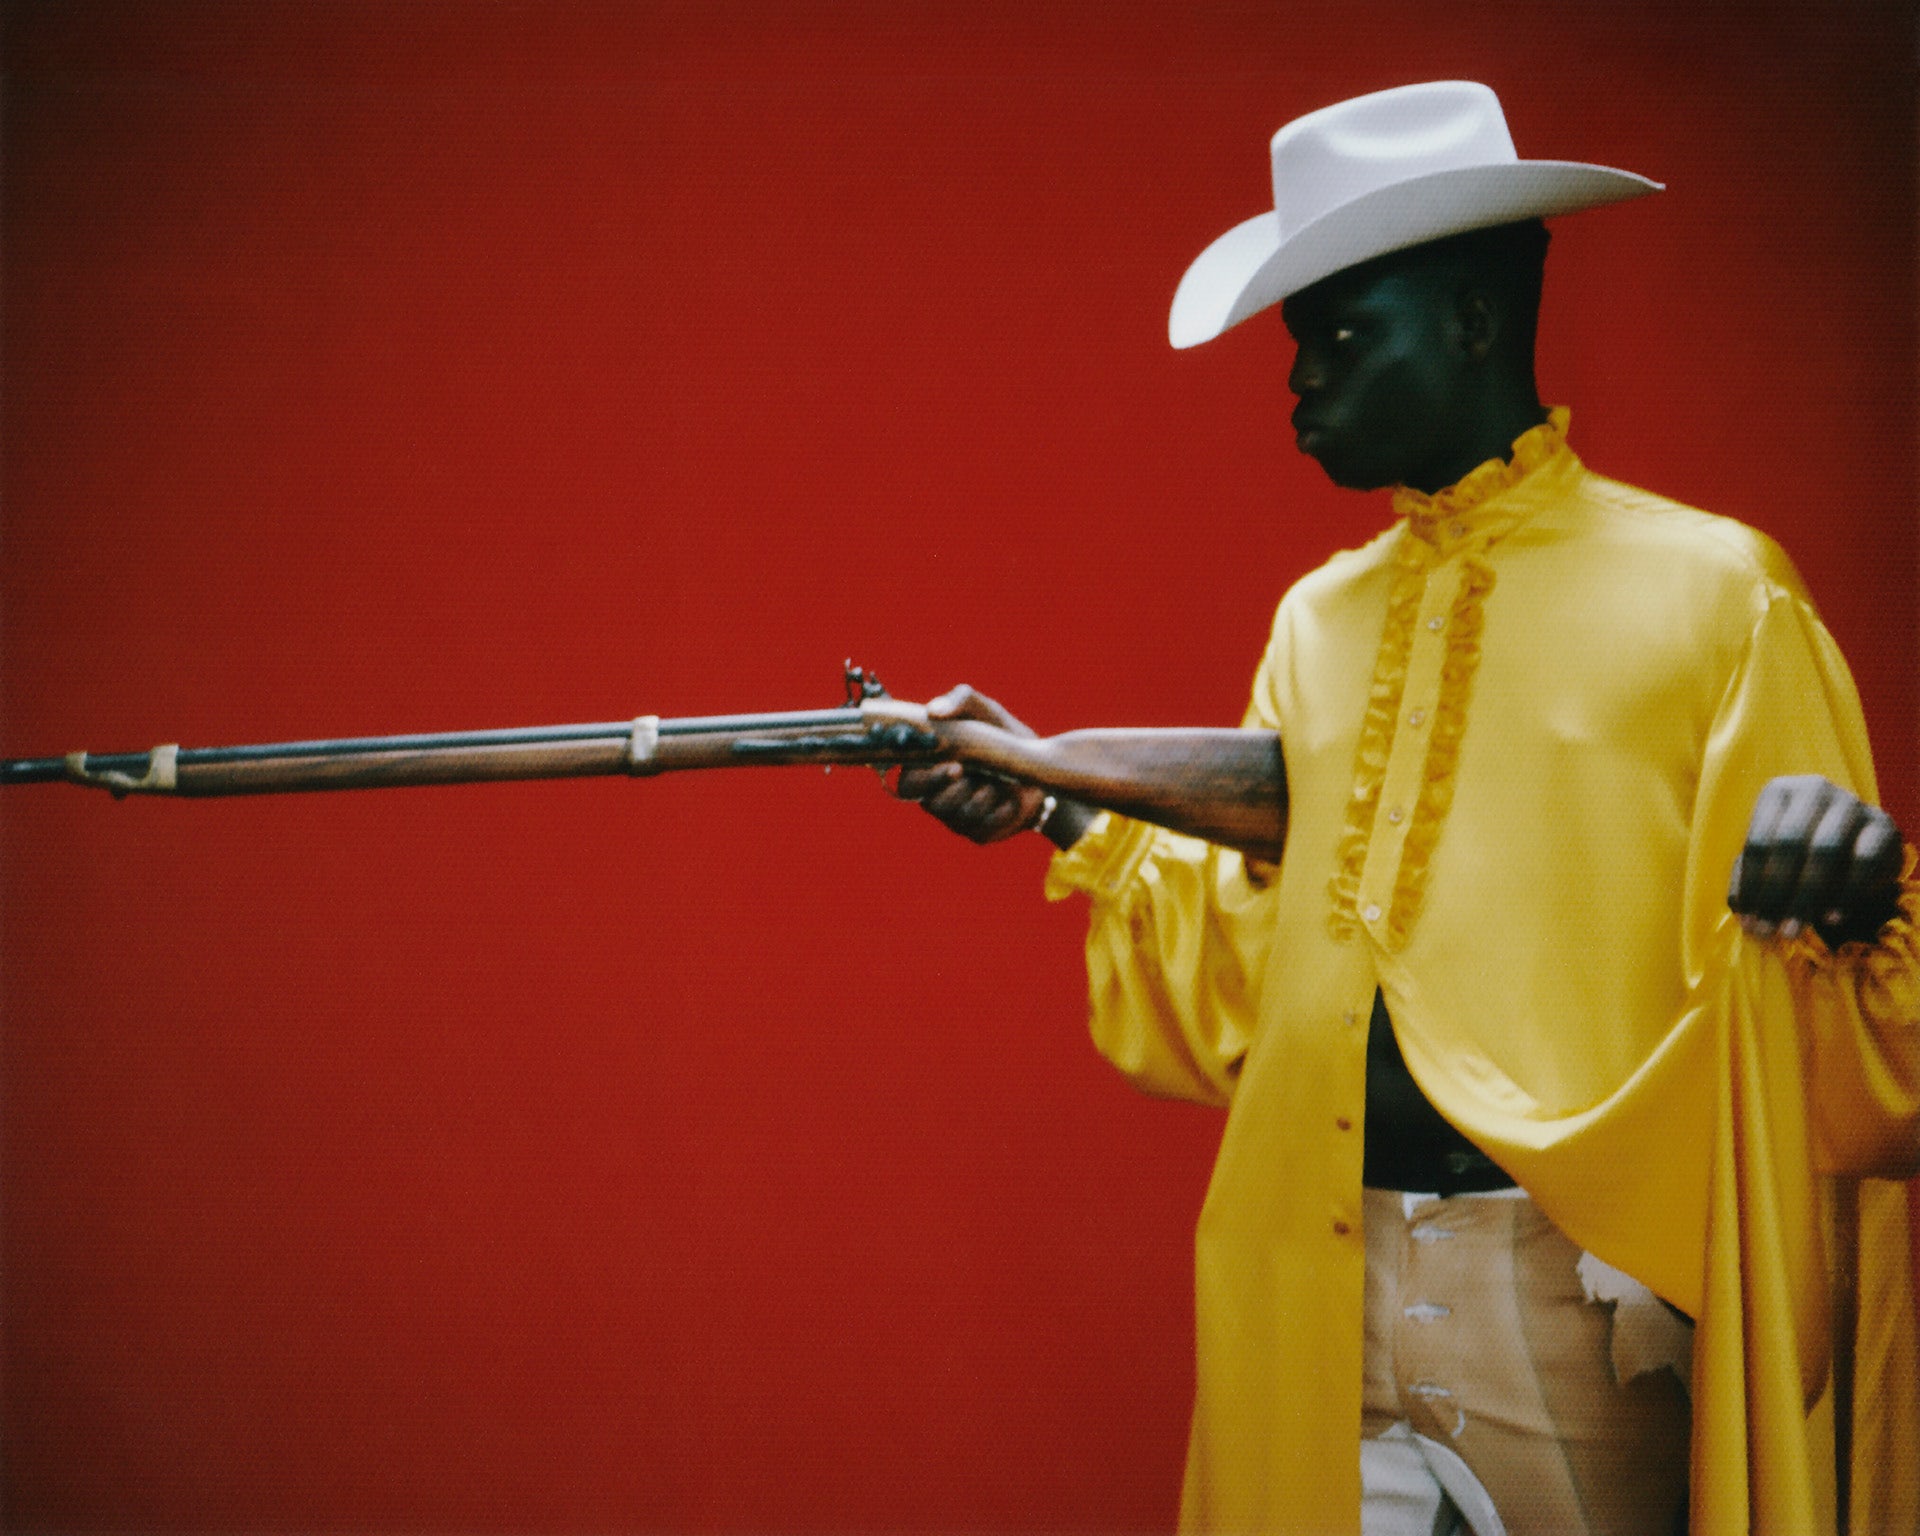 Image by Gabriel Moses of a person wearing a yellow shirt and white cowboy hat pointing a gun to the left of the image against a red backdrop